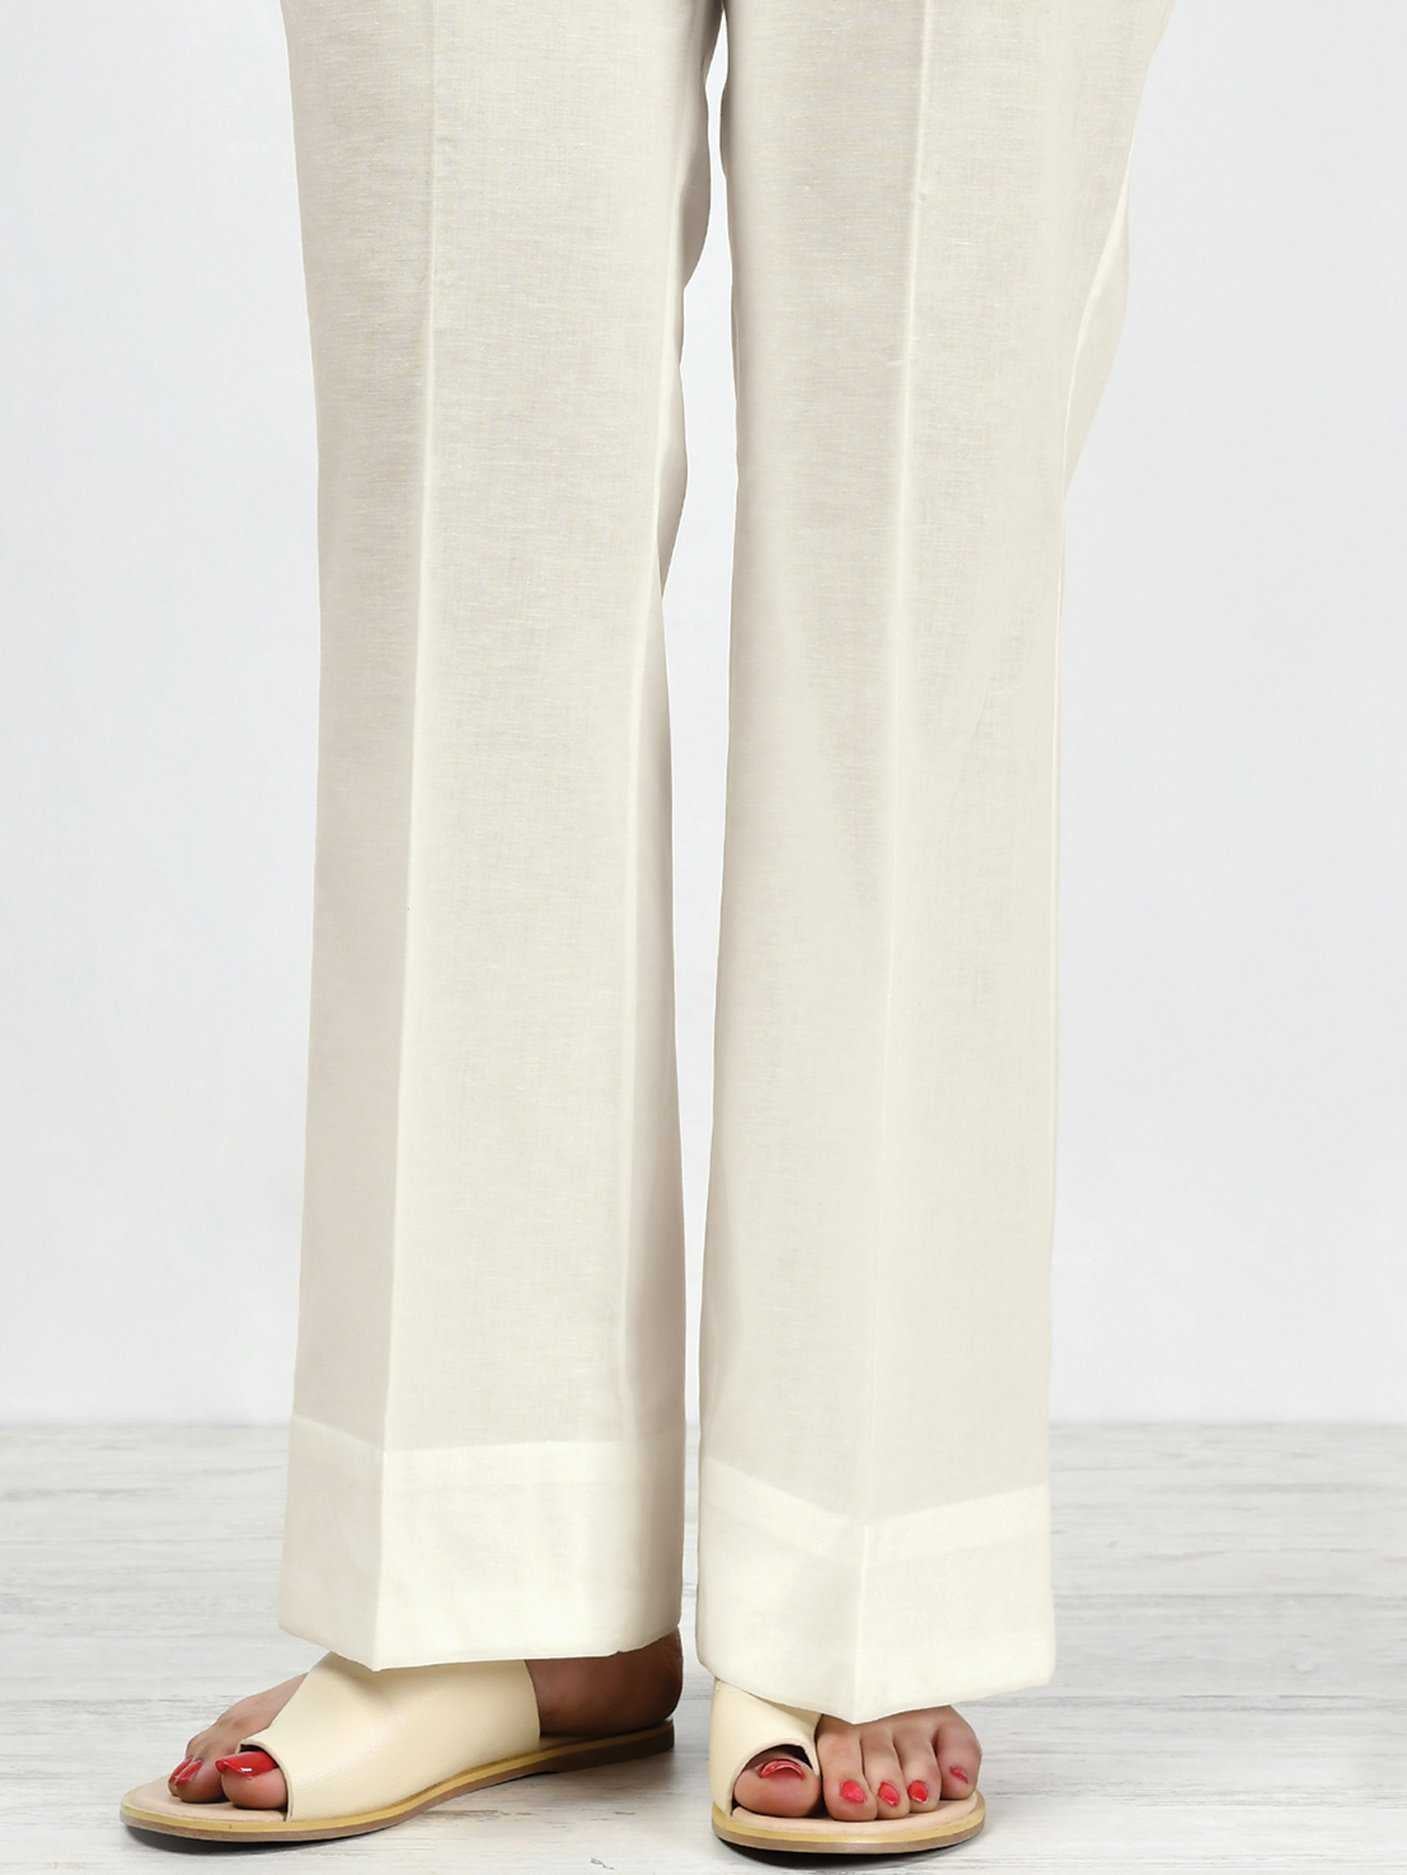 Limelight Unstitched Winter Trouser - White U1018-LSF-WHT 2019 | Limelight Sale 2020